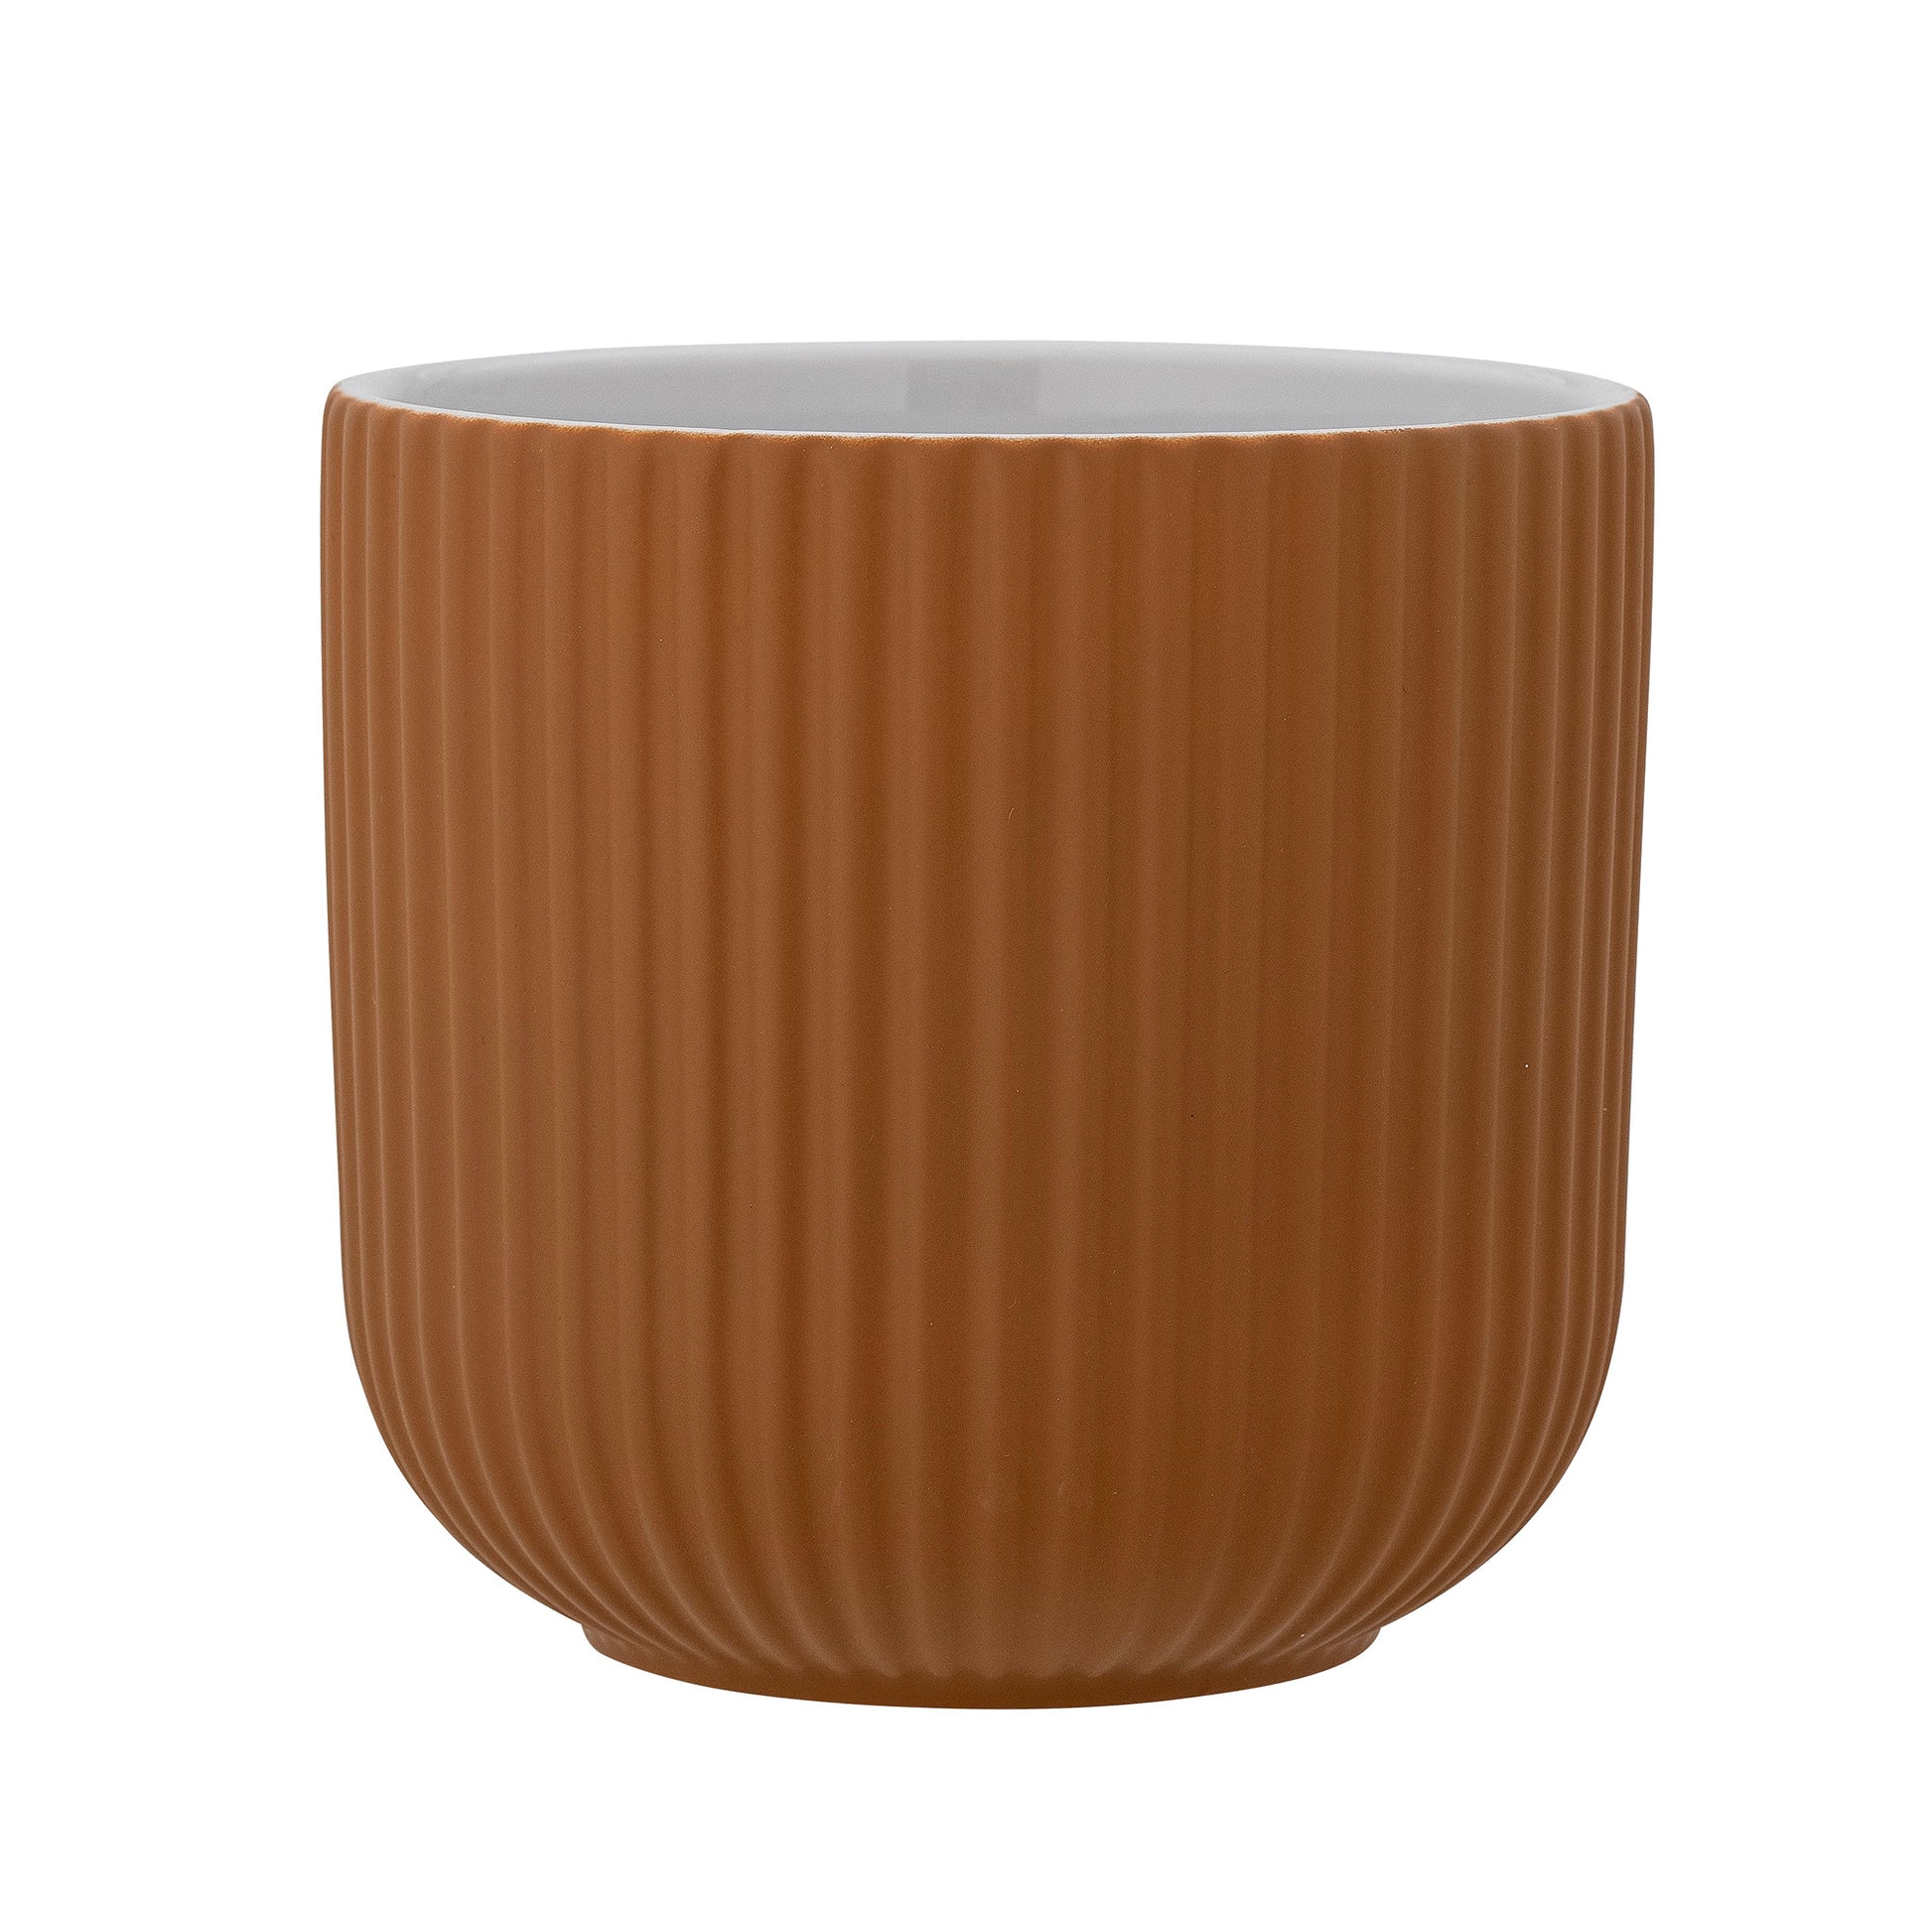 Stoneware plant pot with matte glaze in brown.